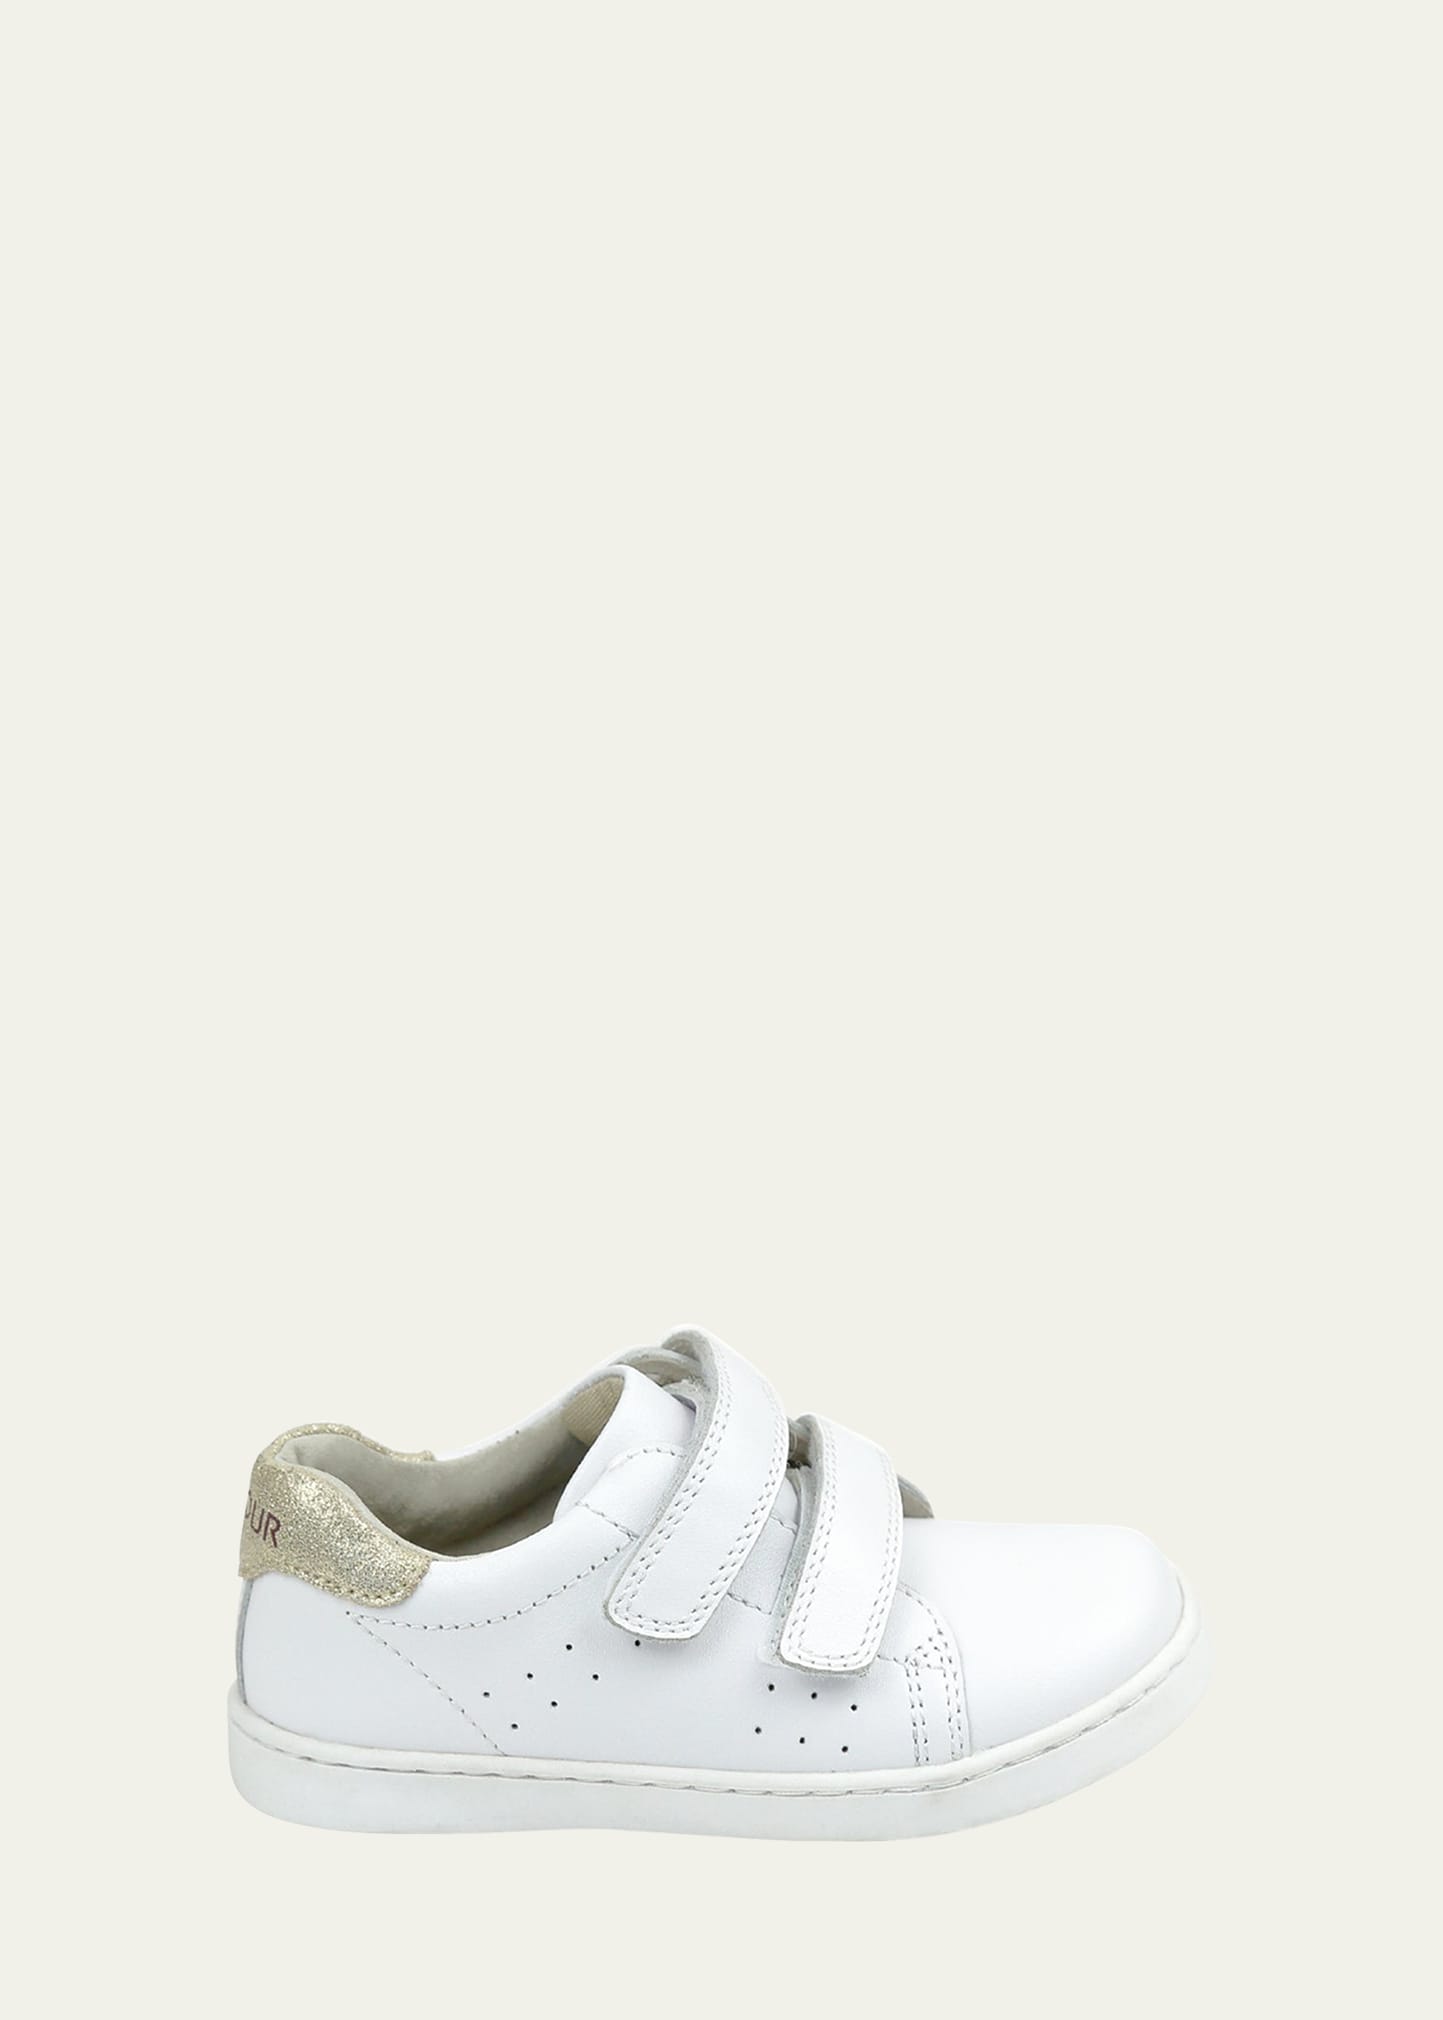 L'amour Shoes Girl's Kenzie Leather Sneakers, Baby/toddlers/kids In White